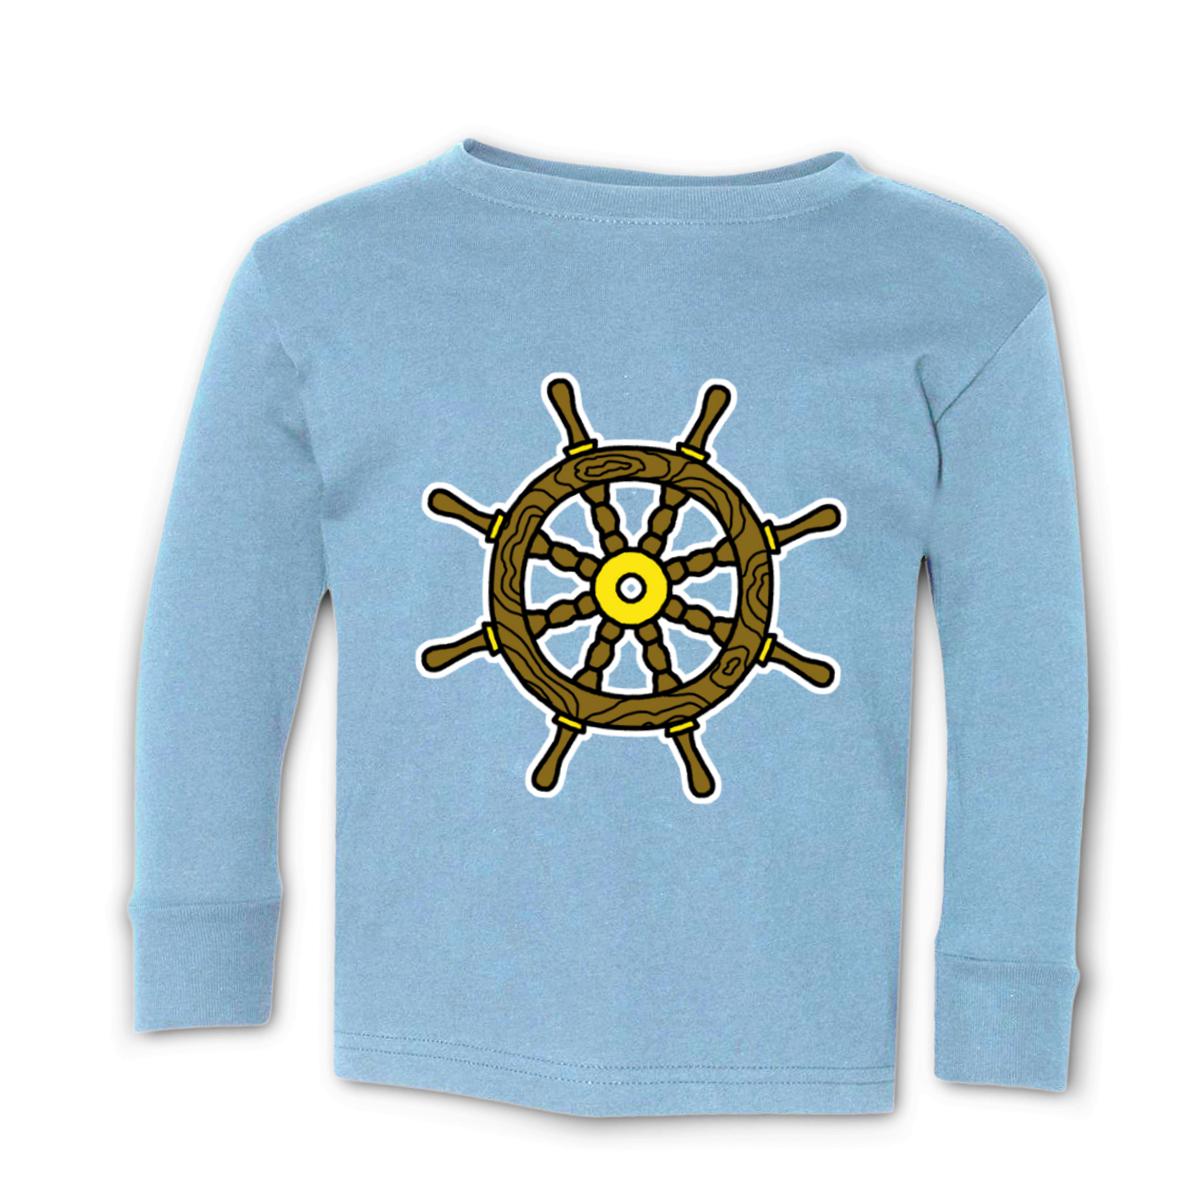 American Traditional Ship Wheel Toddler Long Sleeve Tee 4T light-blue